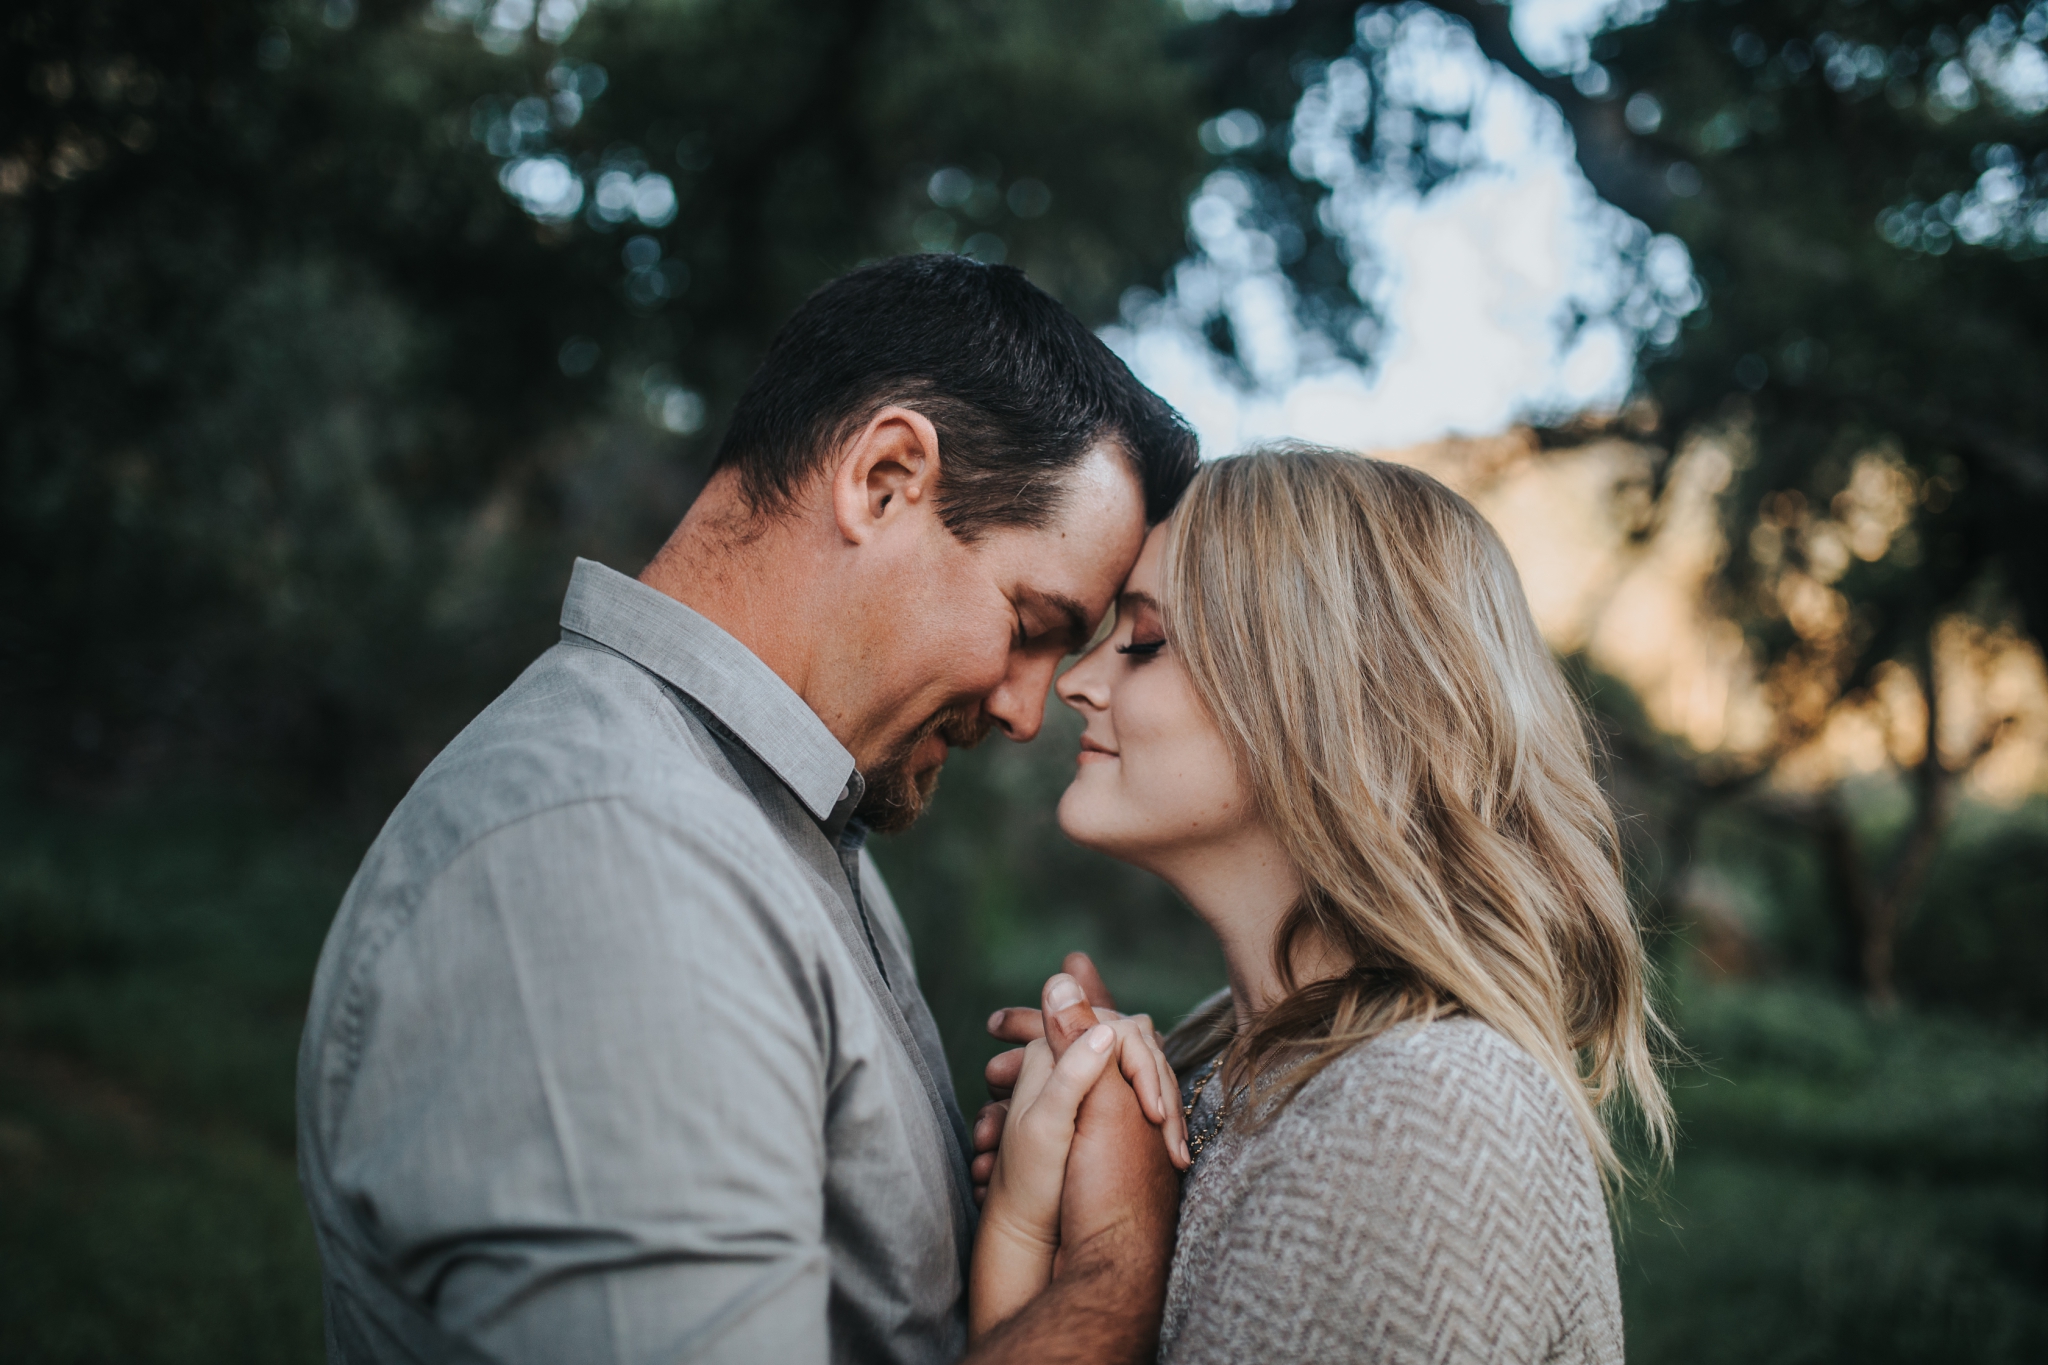 Simi Valley Engagement Photographer